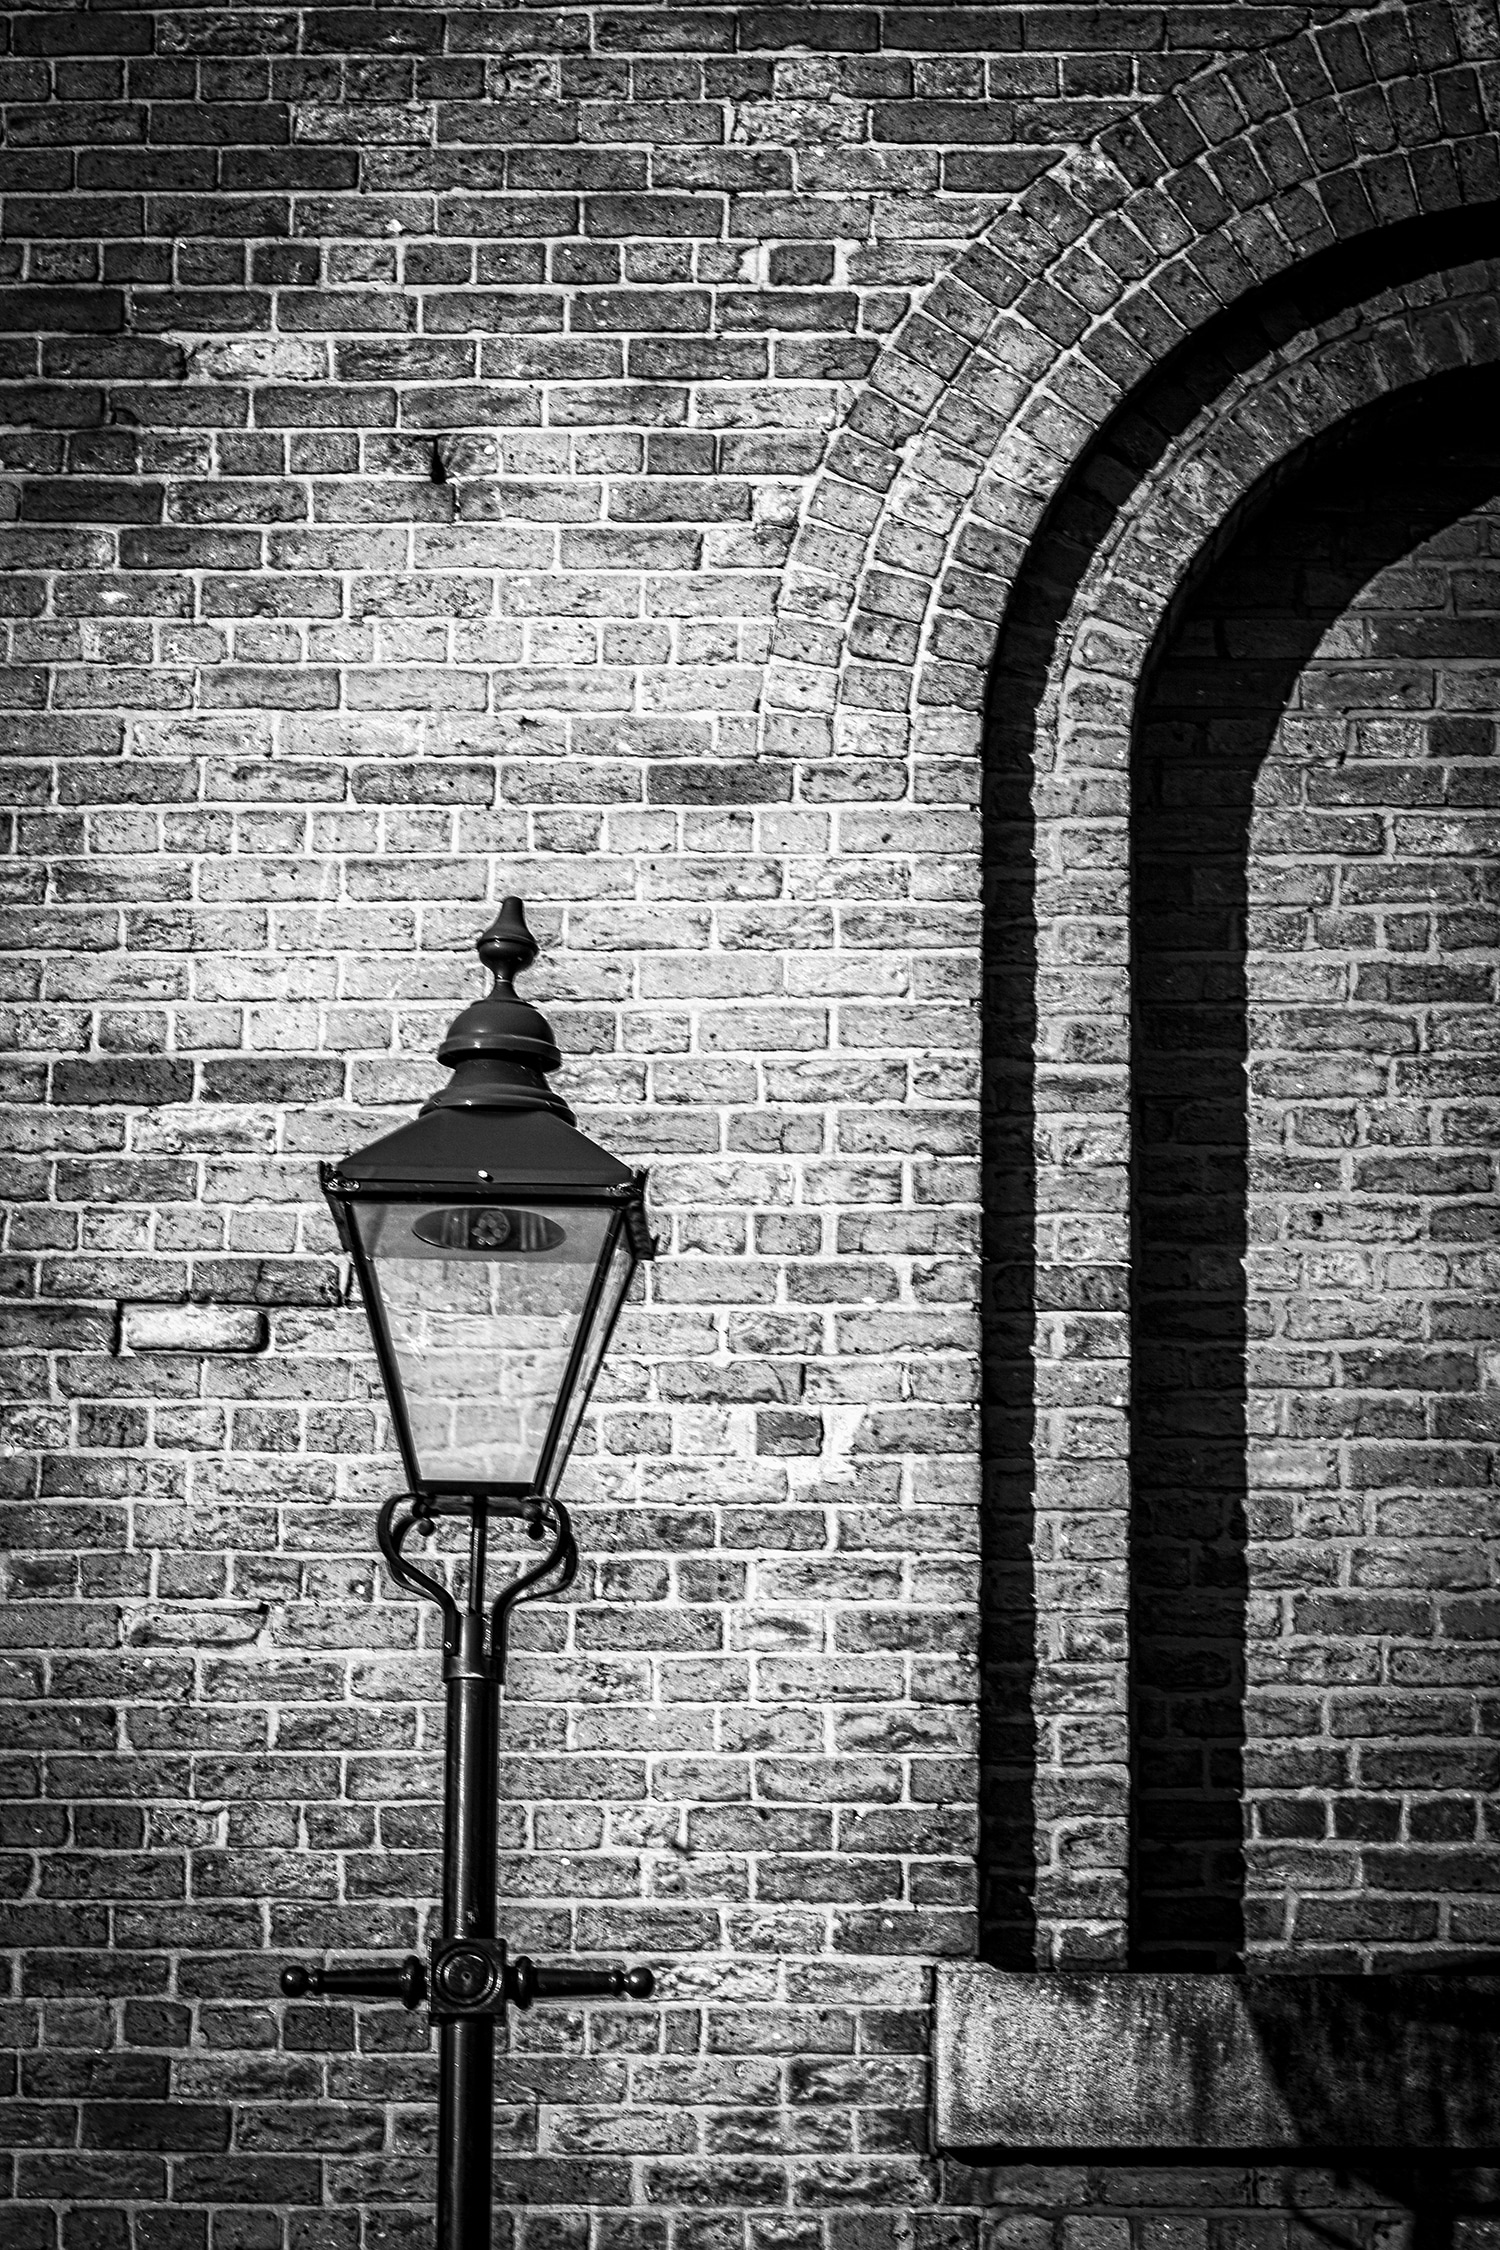 Lamps and Archways, Manchester Manchester Landscapes Architecture 2